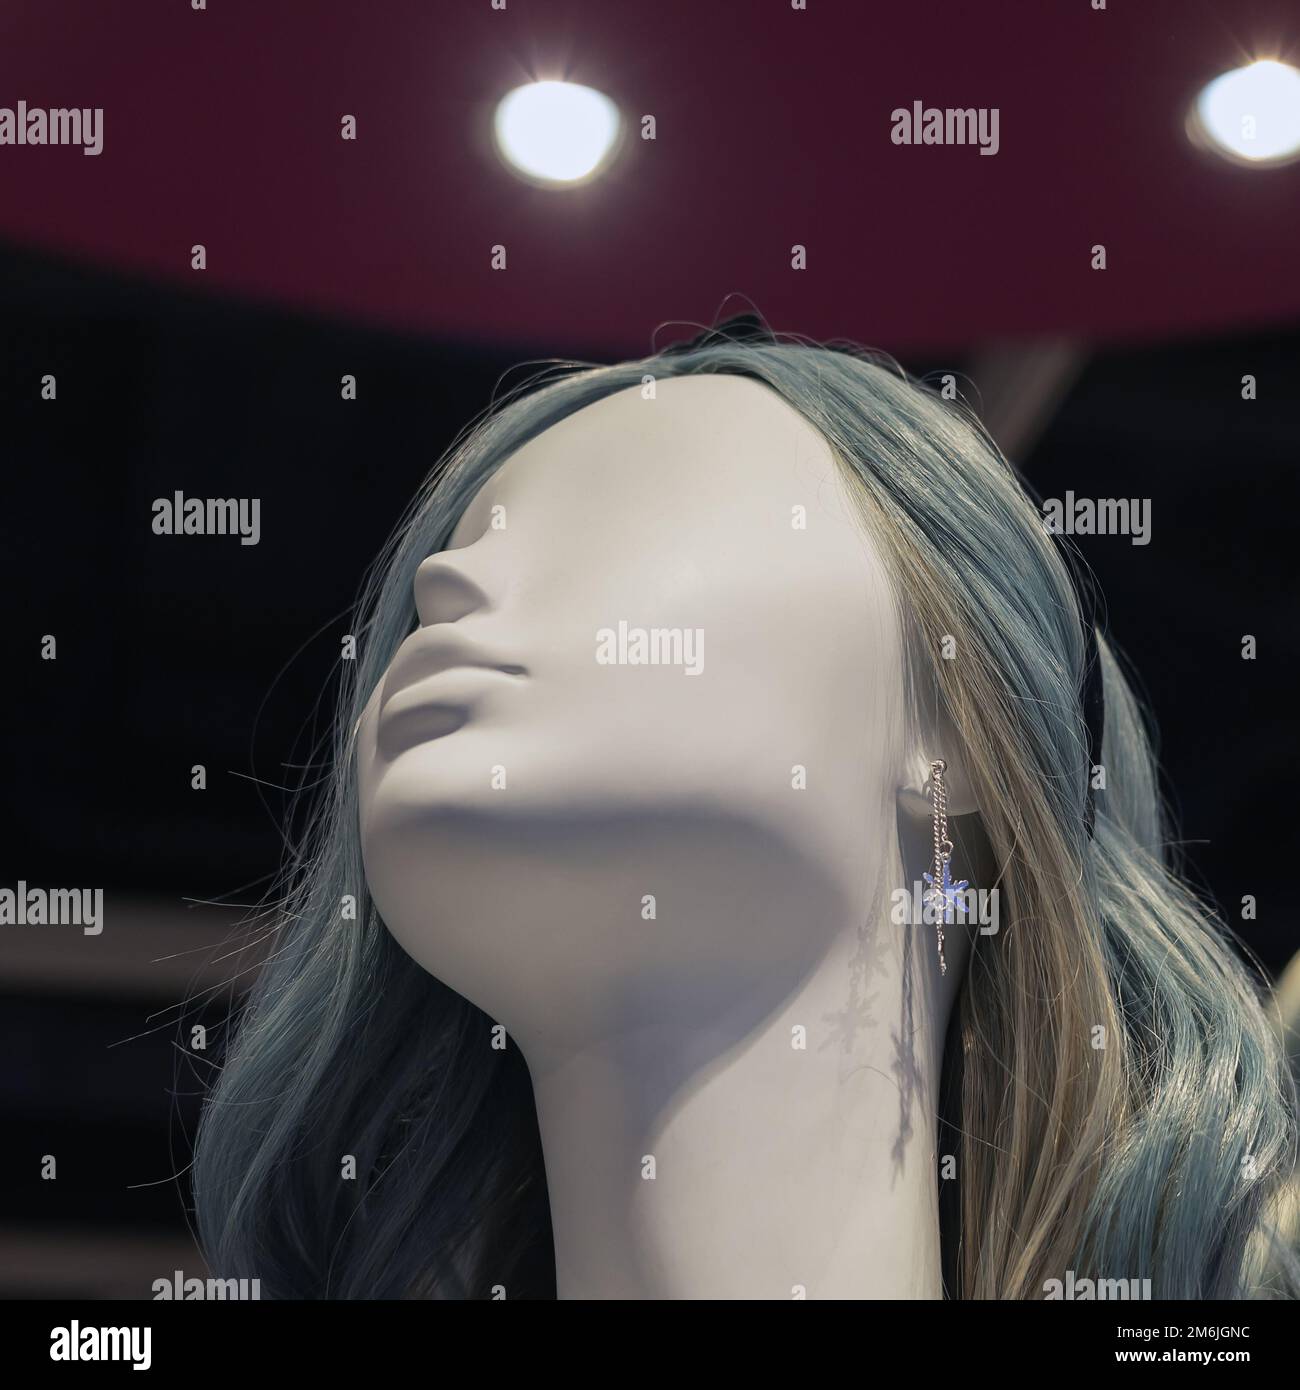 The head of a white female mannequin with gray hair and a silver earring against a purple ceiling with spotlights. Fashion cloth Stock Photo